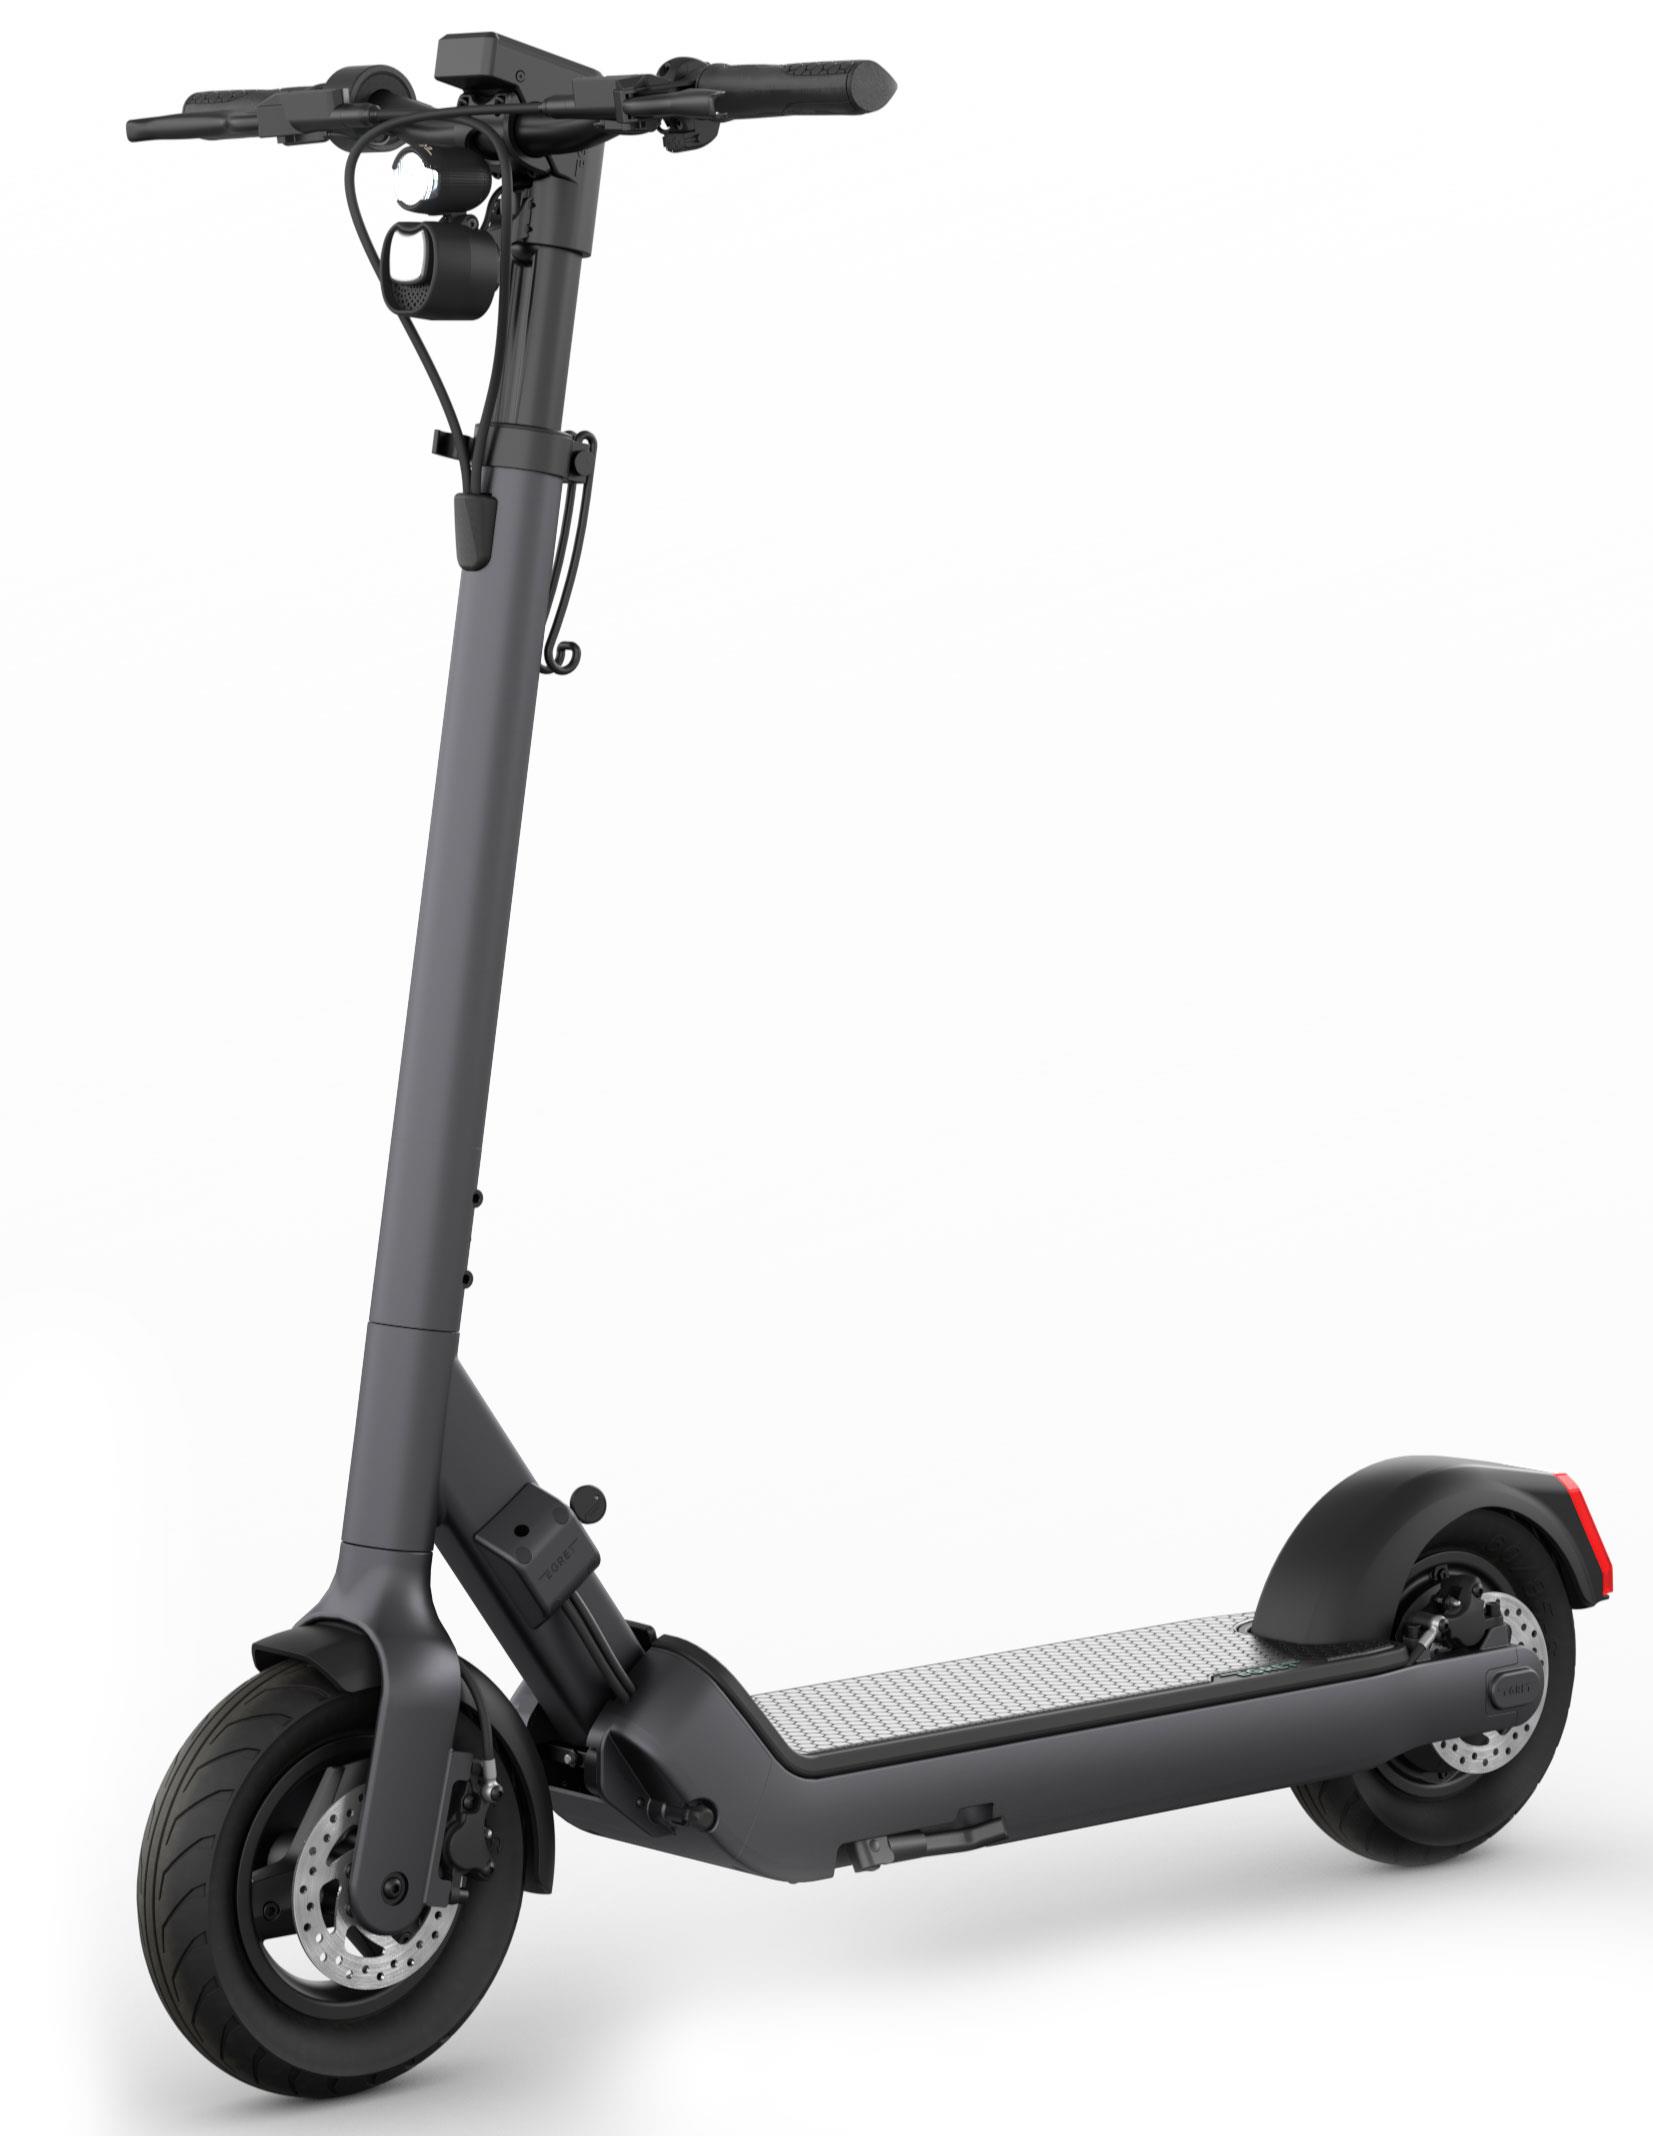 EGRET PRO VERLEIH - also for tours with a range of 80 km!